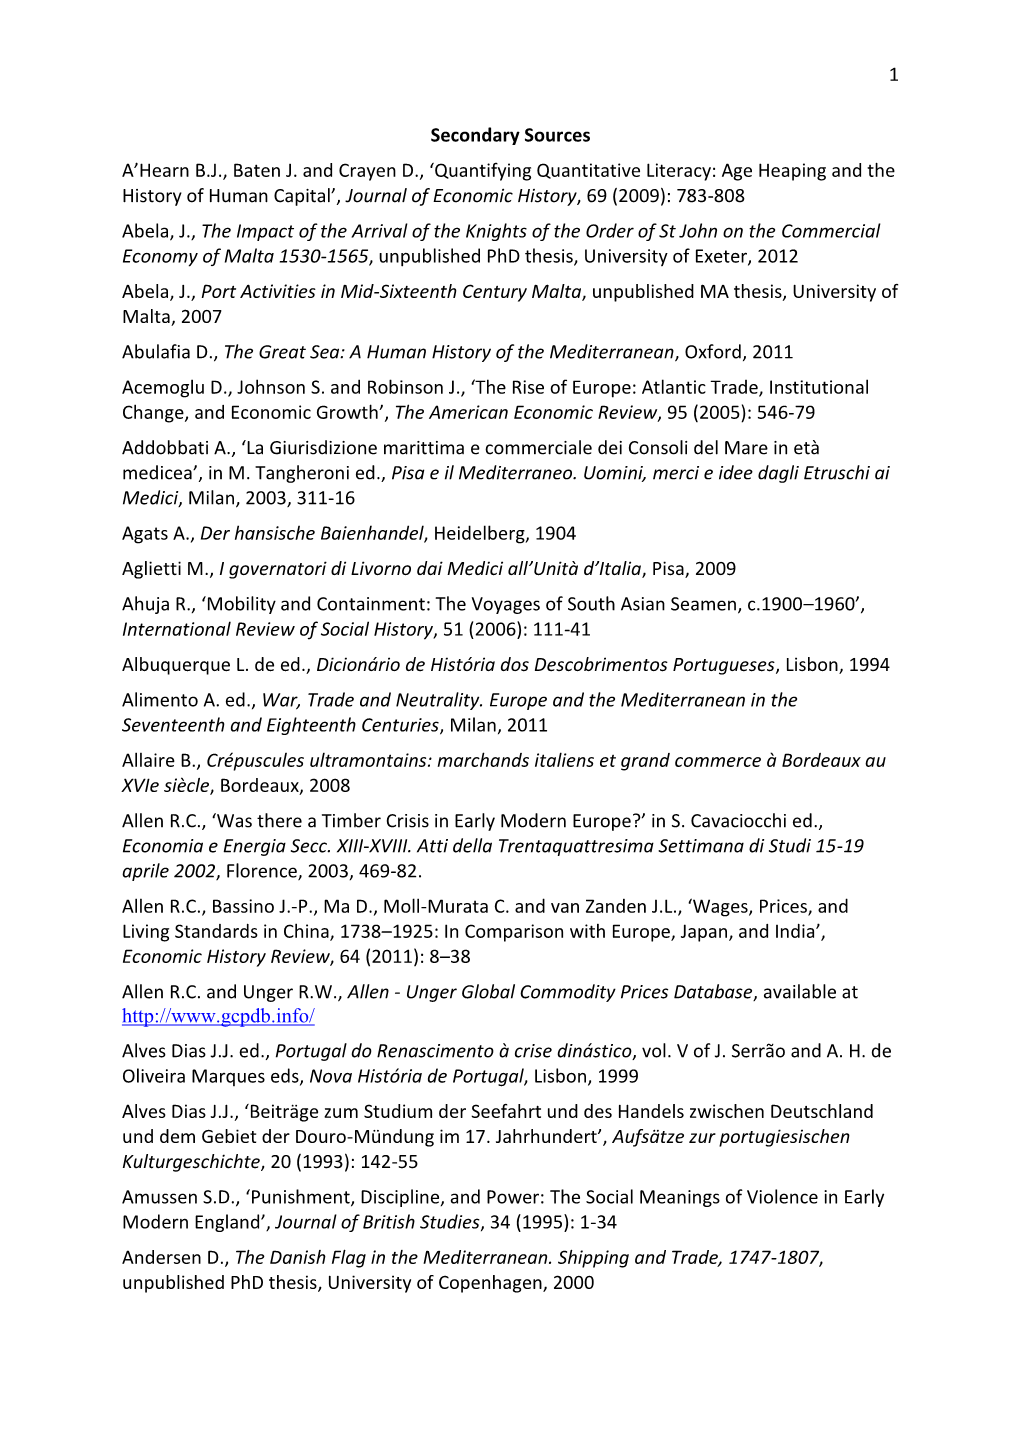 1 Secondary Sources A'hearn B.J., Baten J. and Crayen D., 'Quantifying Quantitative Literacy: Age Heaping and the History Of